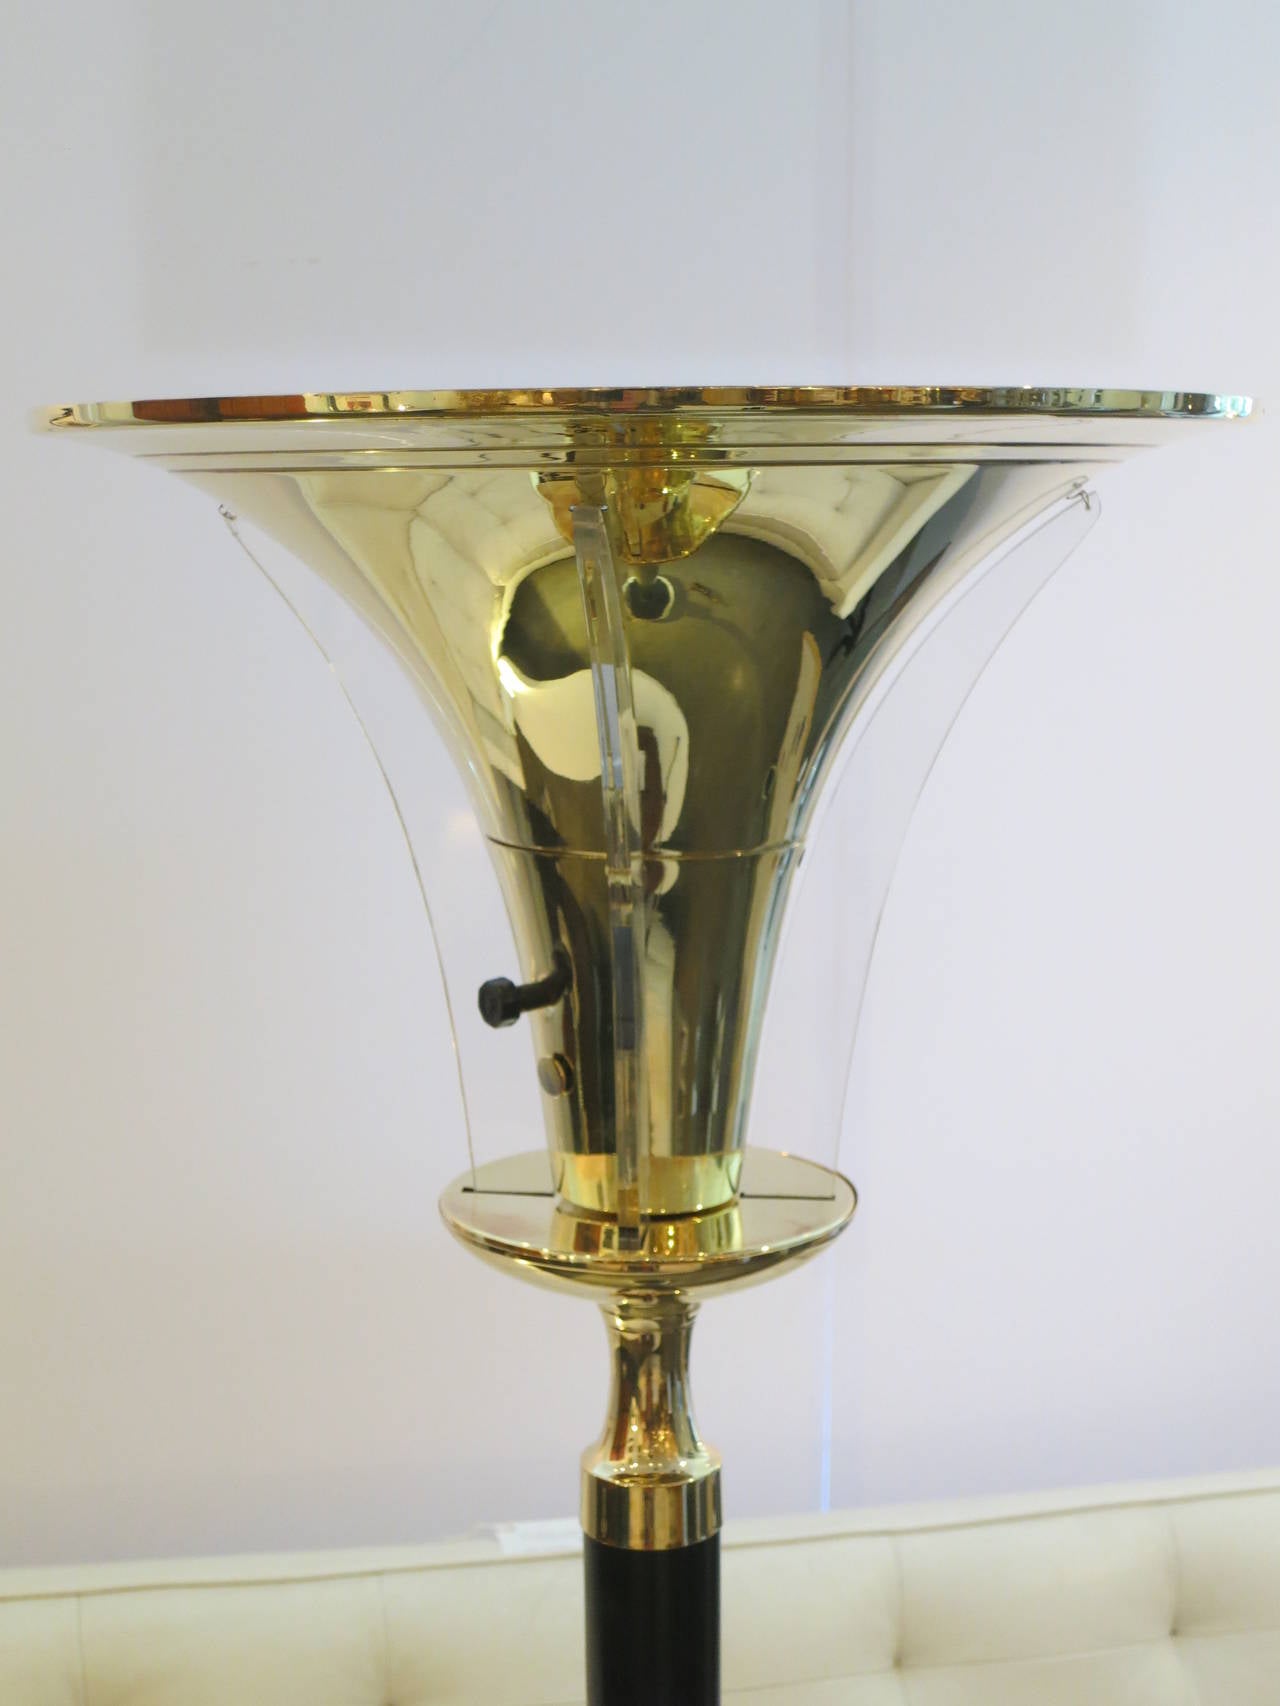 A classic pair of uplights with  brass, trumpet shaped shades and brass accents. The upright column and disc base are an ebonized metal. Four lucite leaves surround each brass shade and heighten the glamour of the lamp. Each torchiere has a single